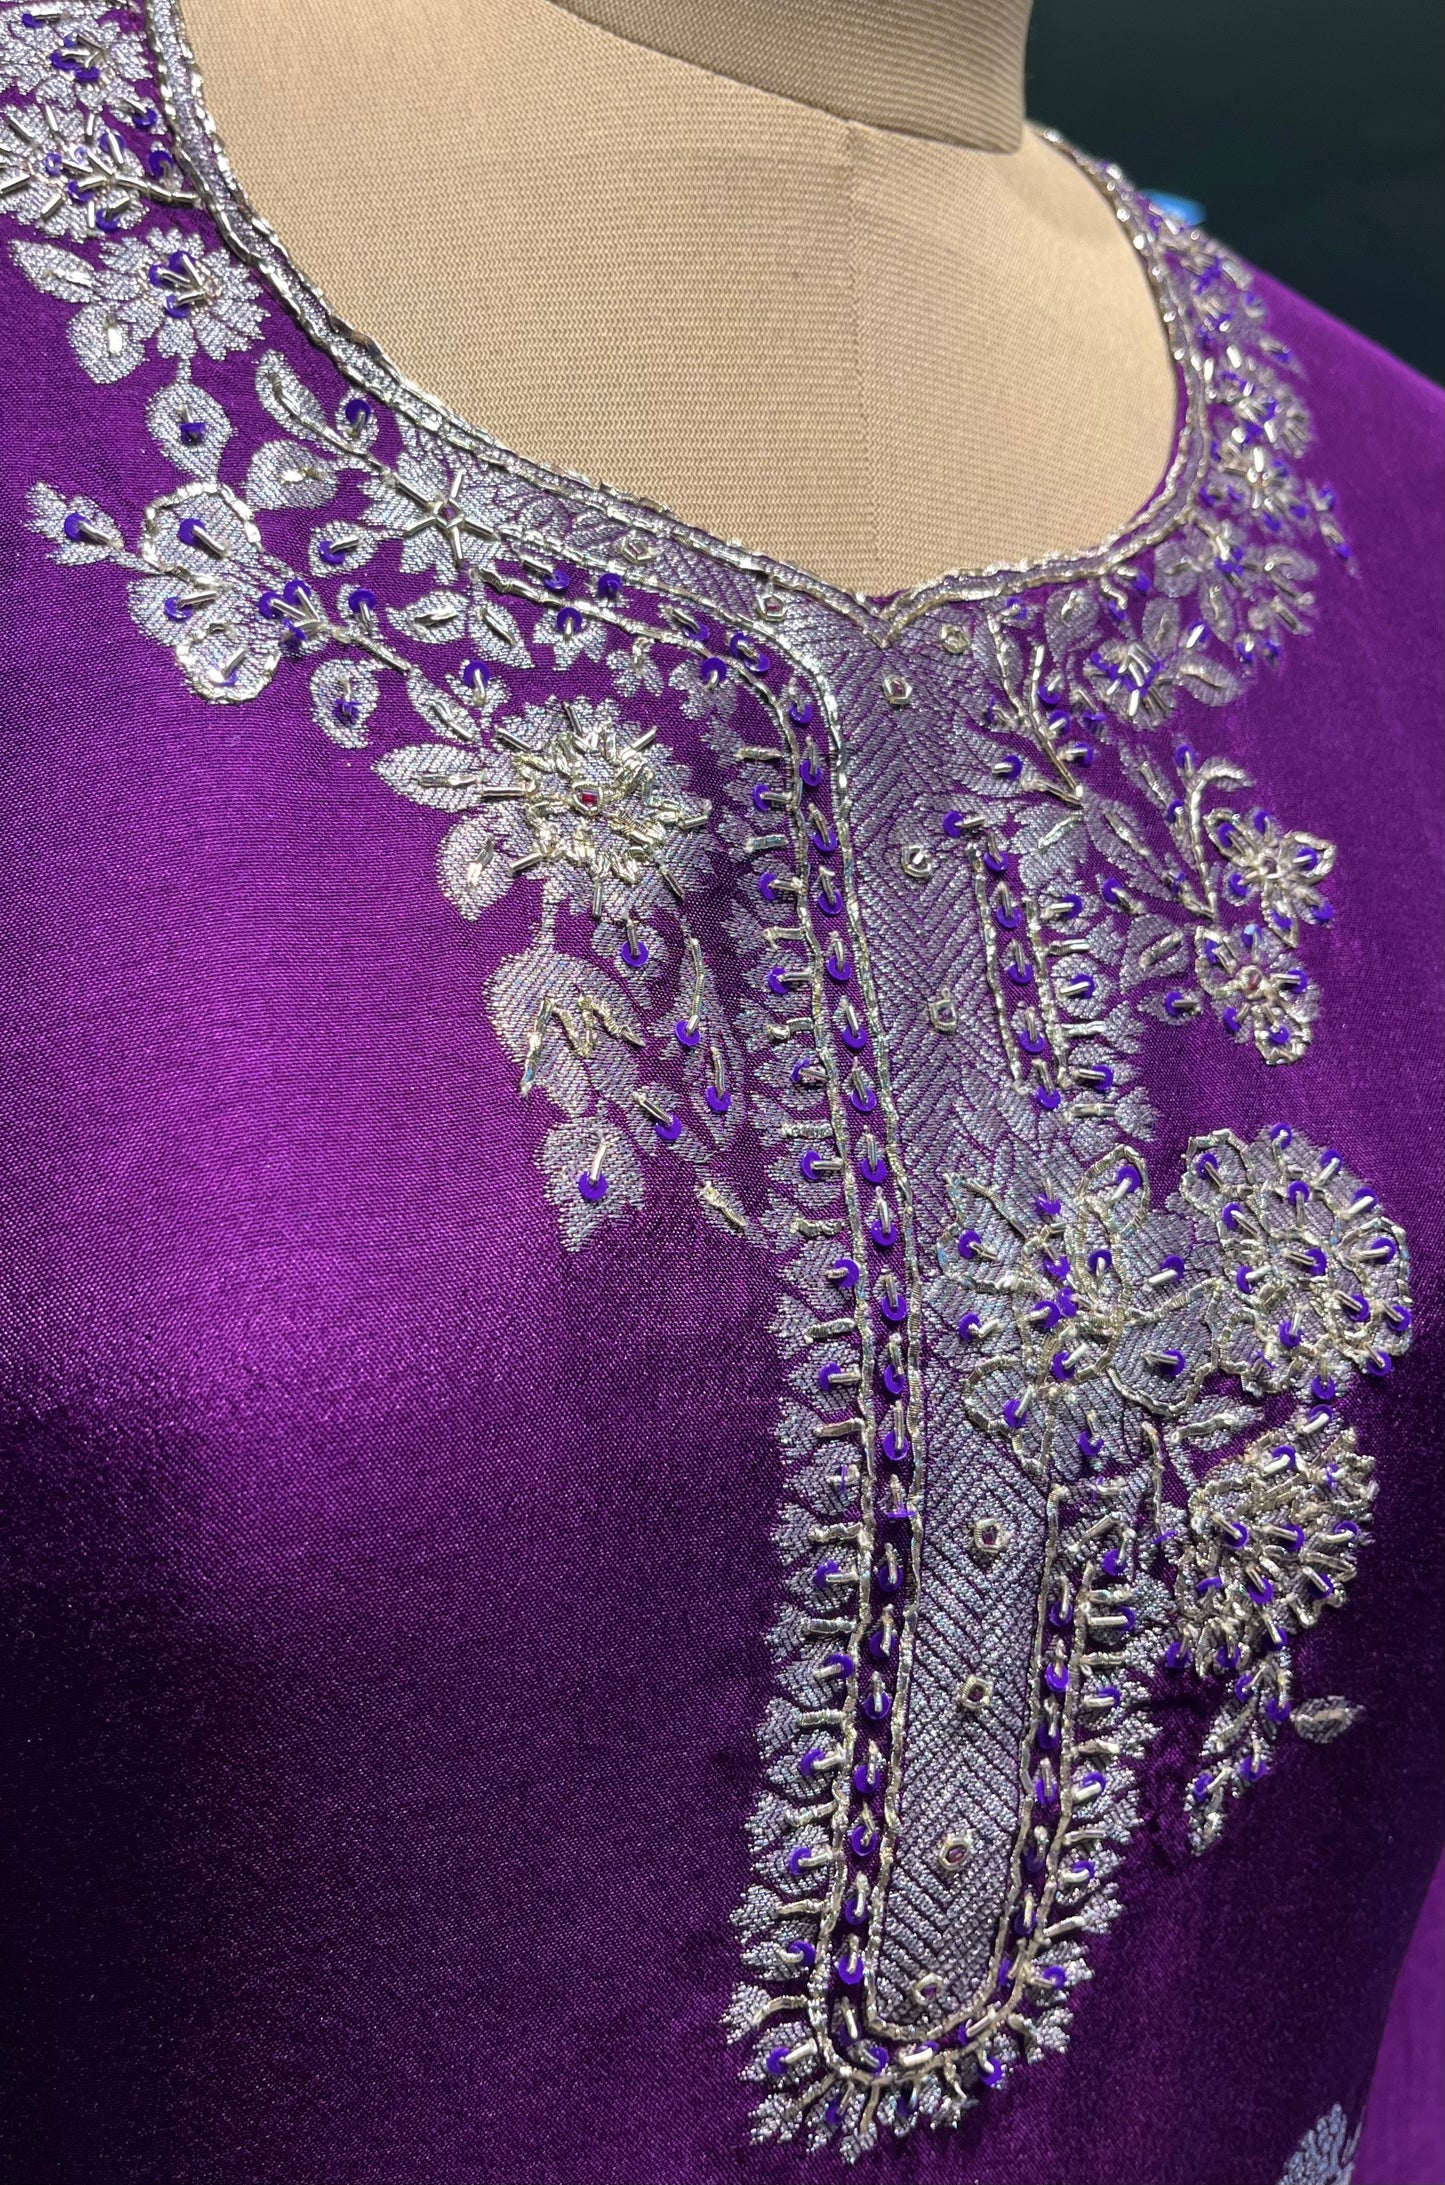 PURPLE COLOUR DOLA SILK READYMADE SUIT EMBELLISHED WITH ZARI WEAVES